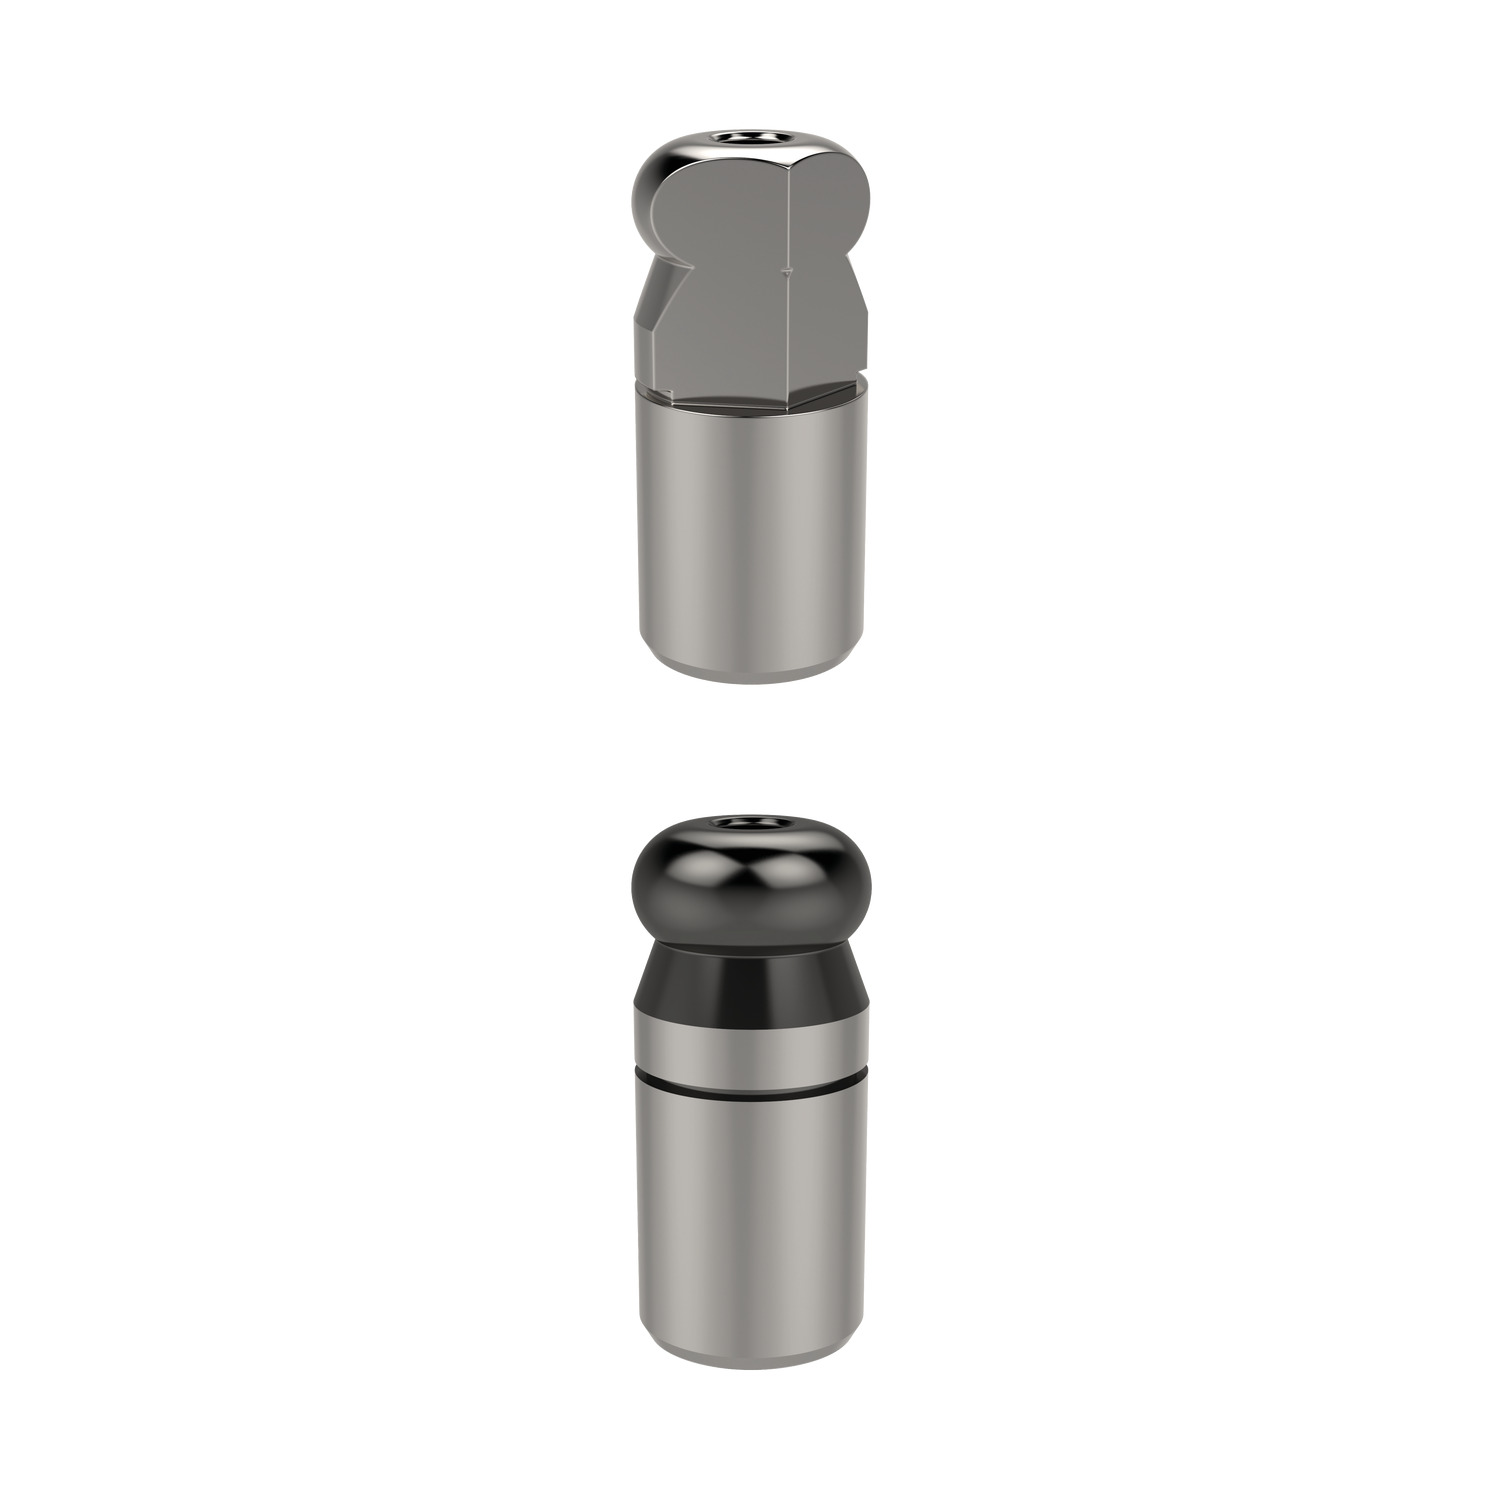 36341.W0568 Location Pins, Non-Stepped Stainless Steel - Plain - 8 - 8